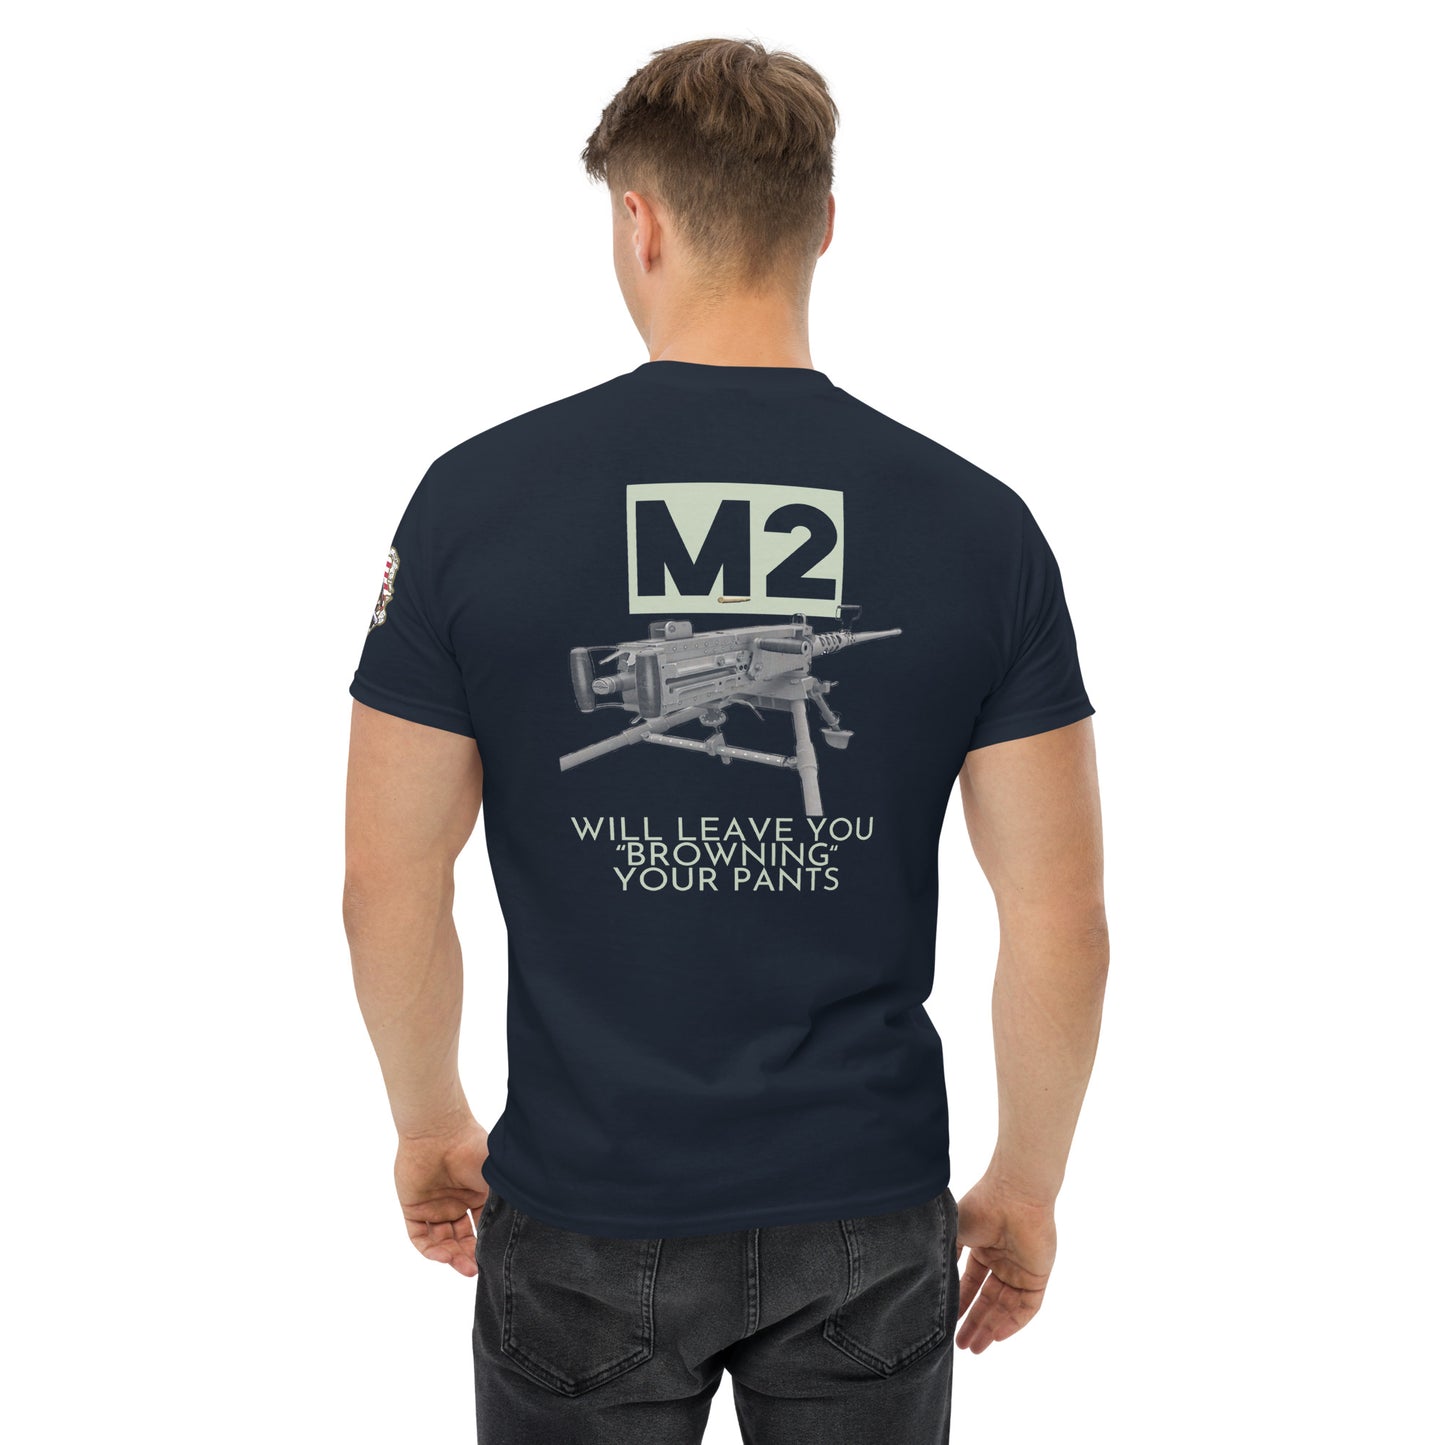 M2-“Browning” Your Pants